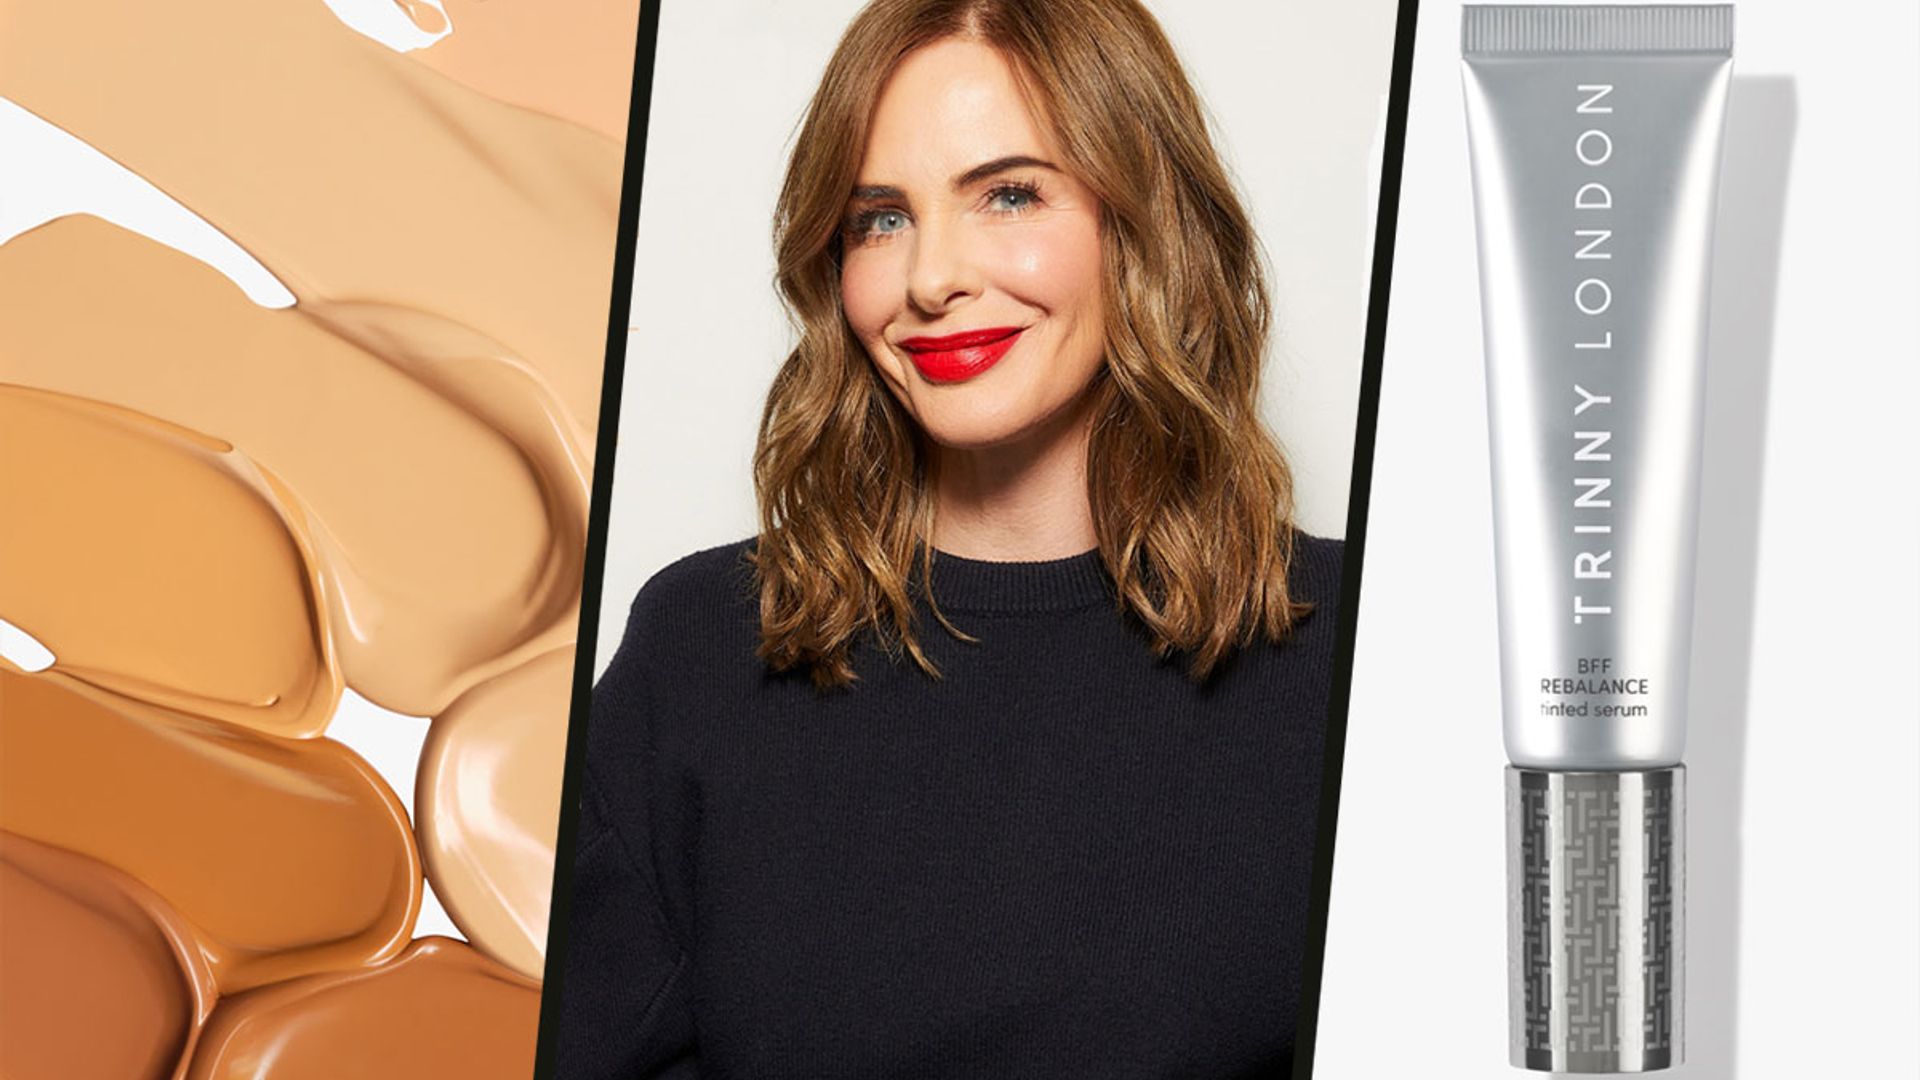 Trinny London's new skin-perfecting foundation is a 